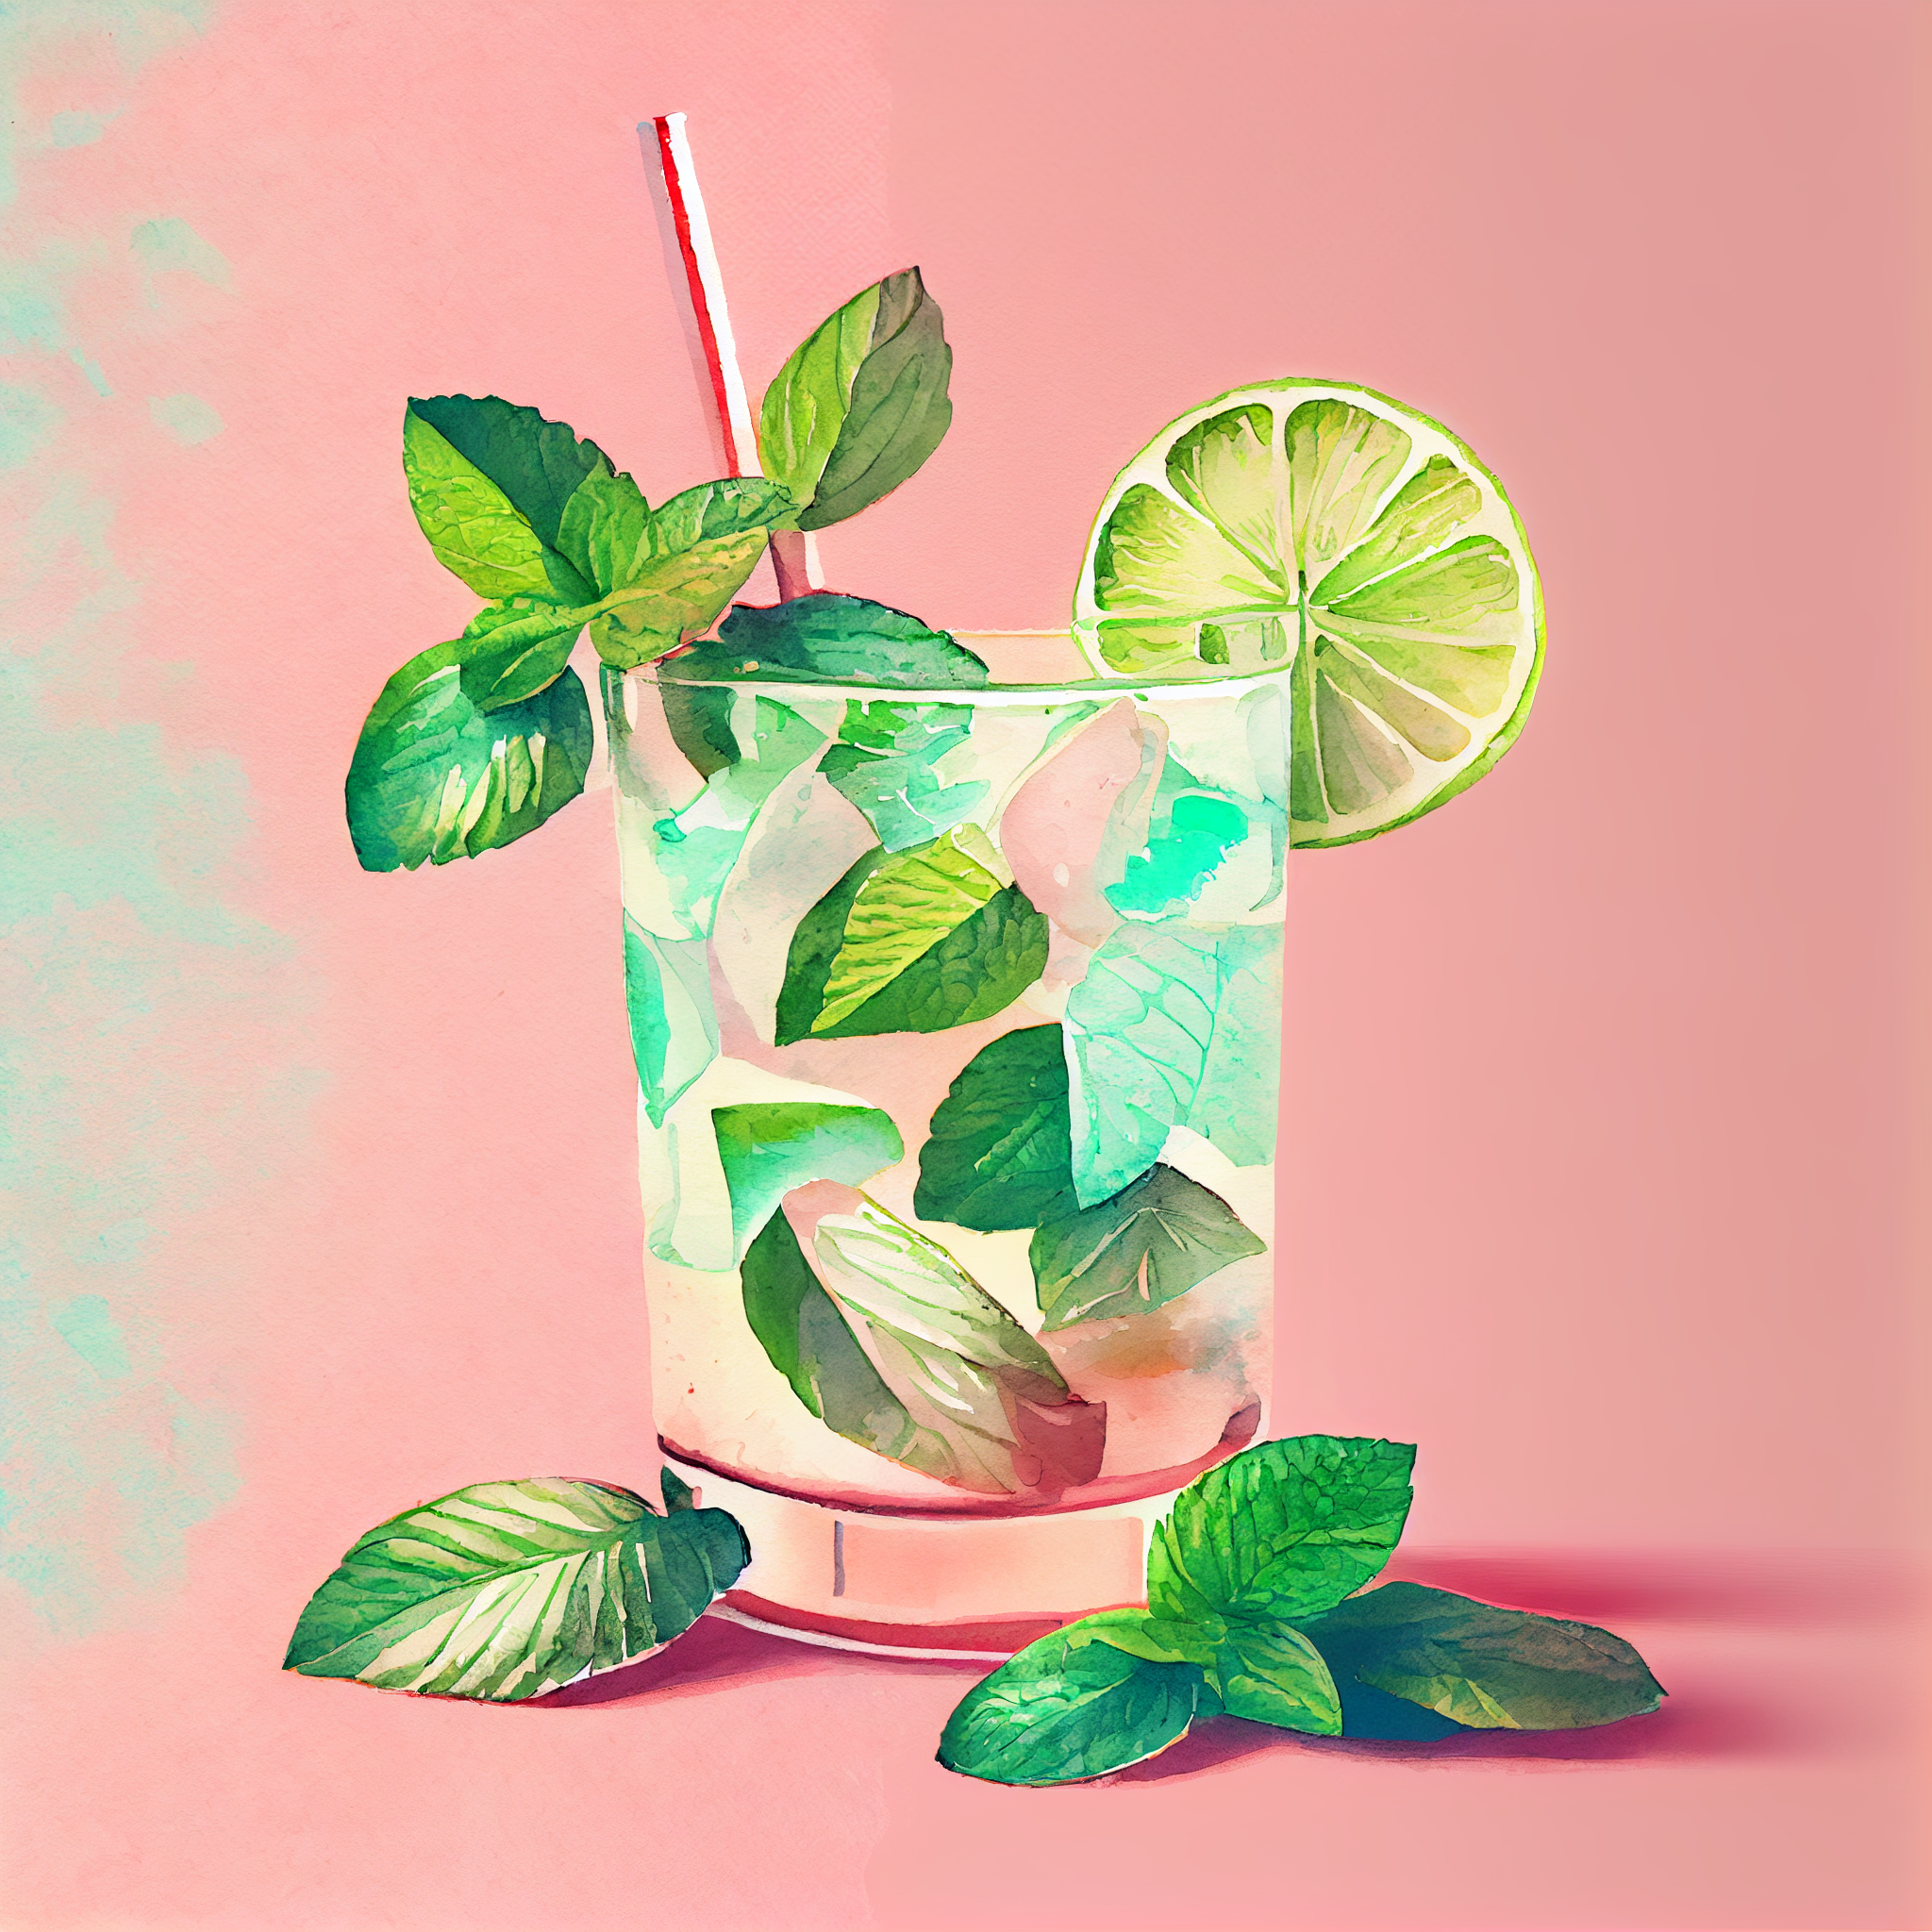 Mojito Refreshment: Watercolor Print of a Cocktail with Mint and Lime on a Pink Patterned Background